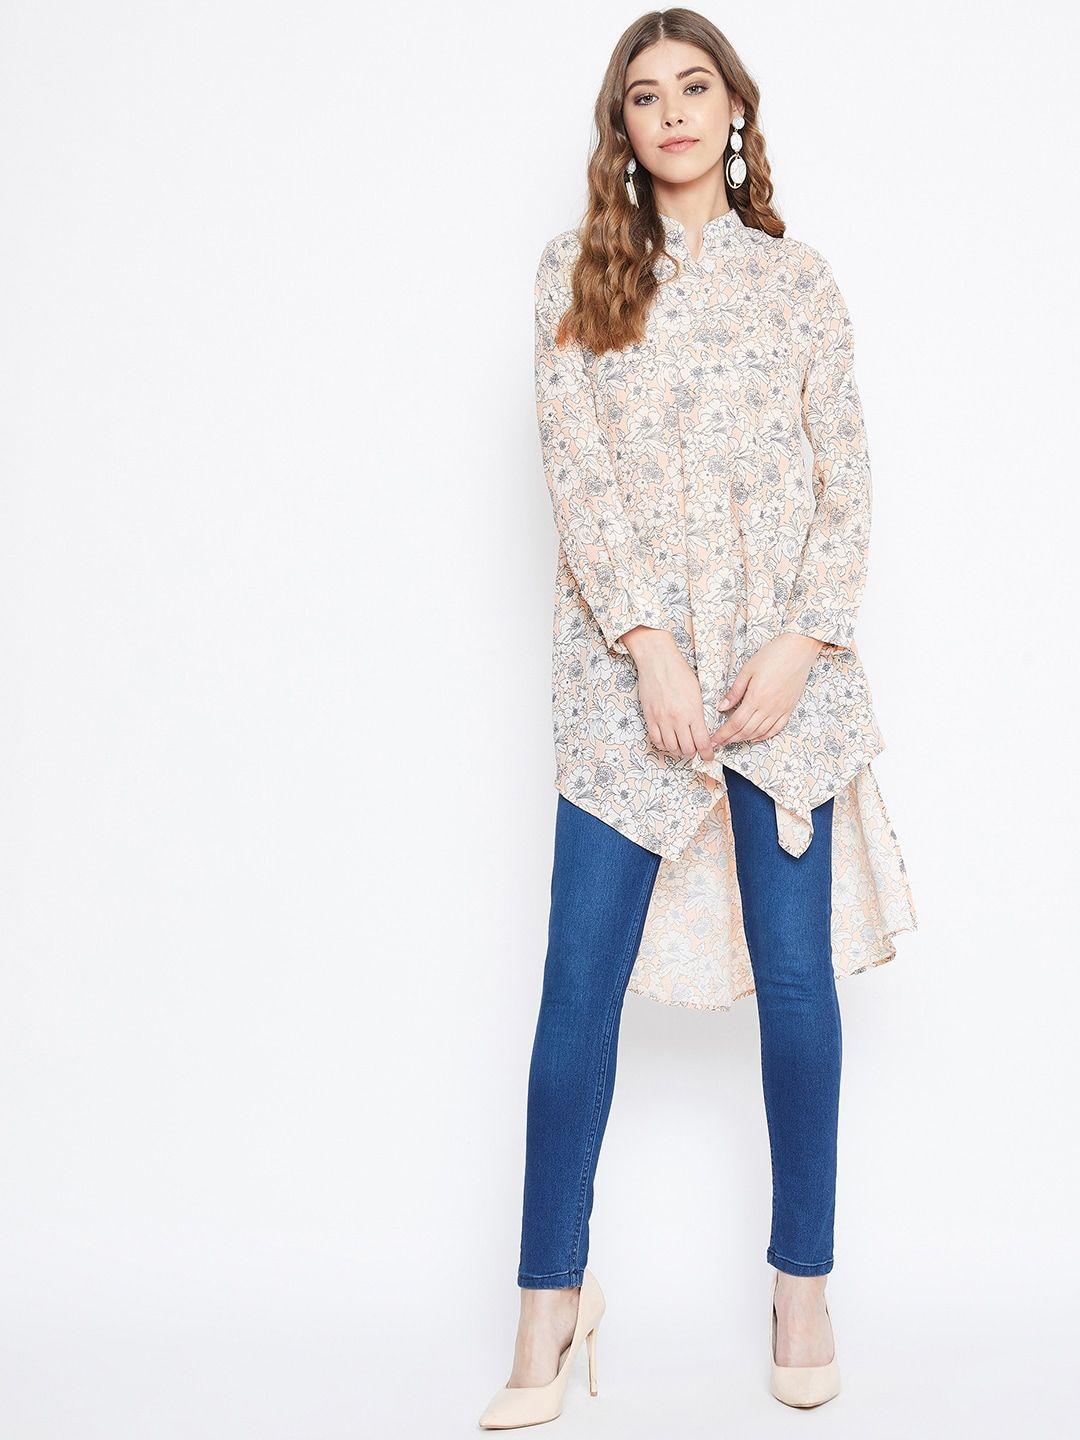 berrylush beige floral printed crepe shirt style top